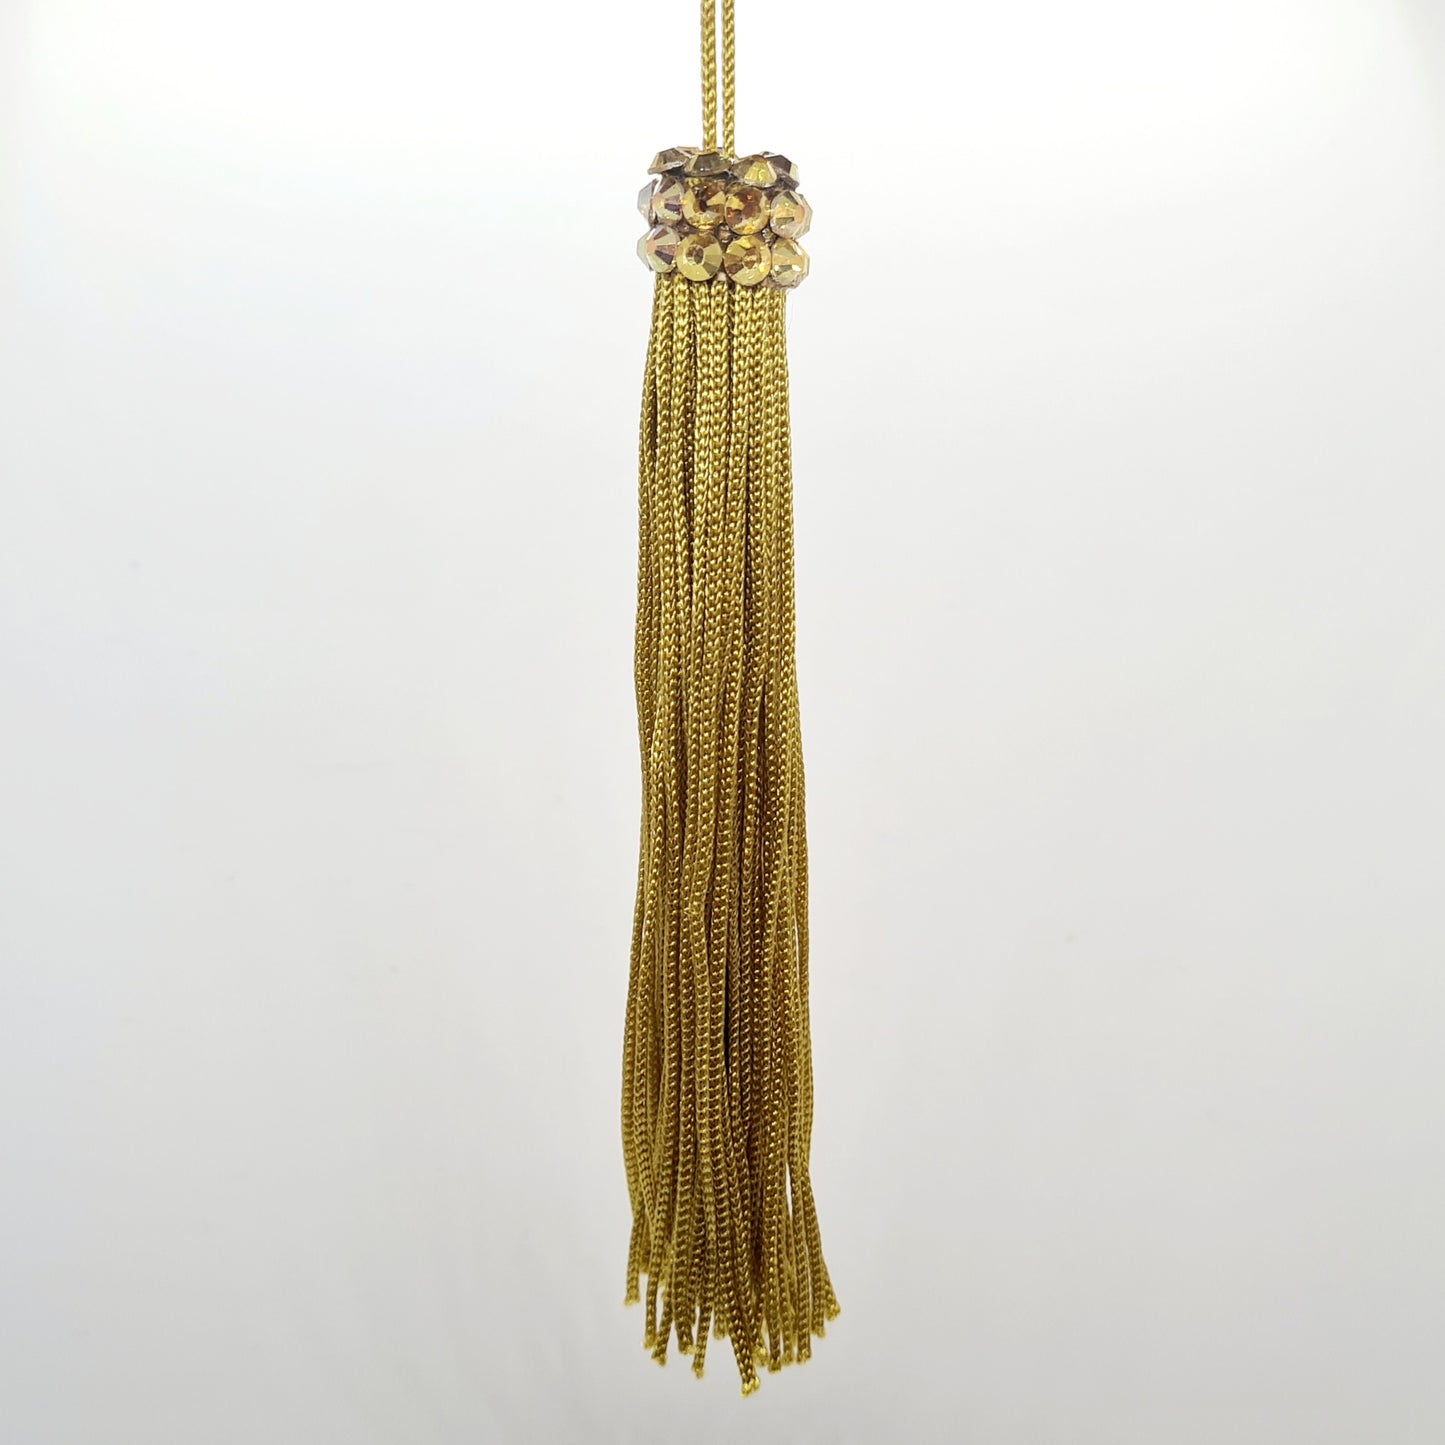 Additional Pair of Tassels